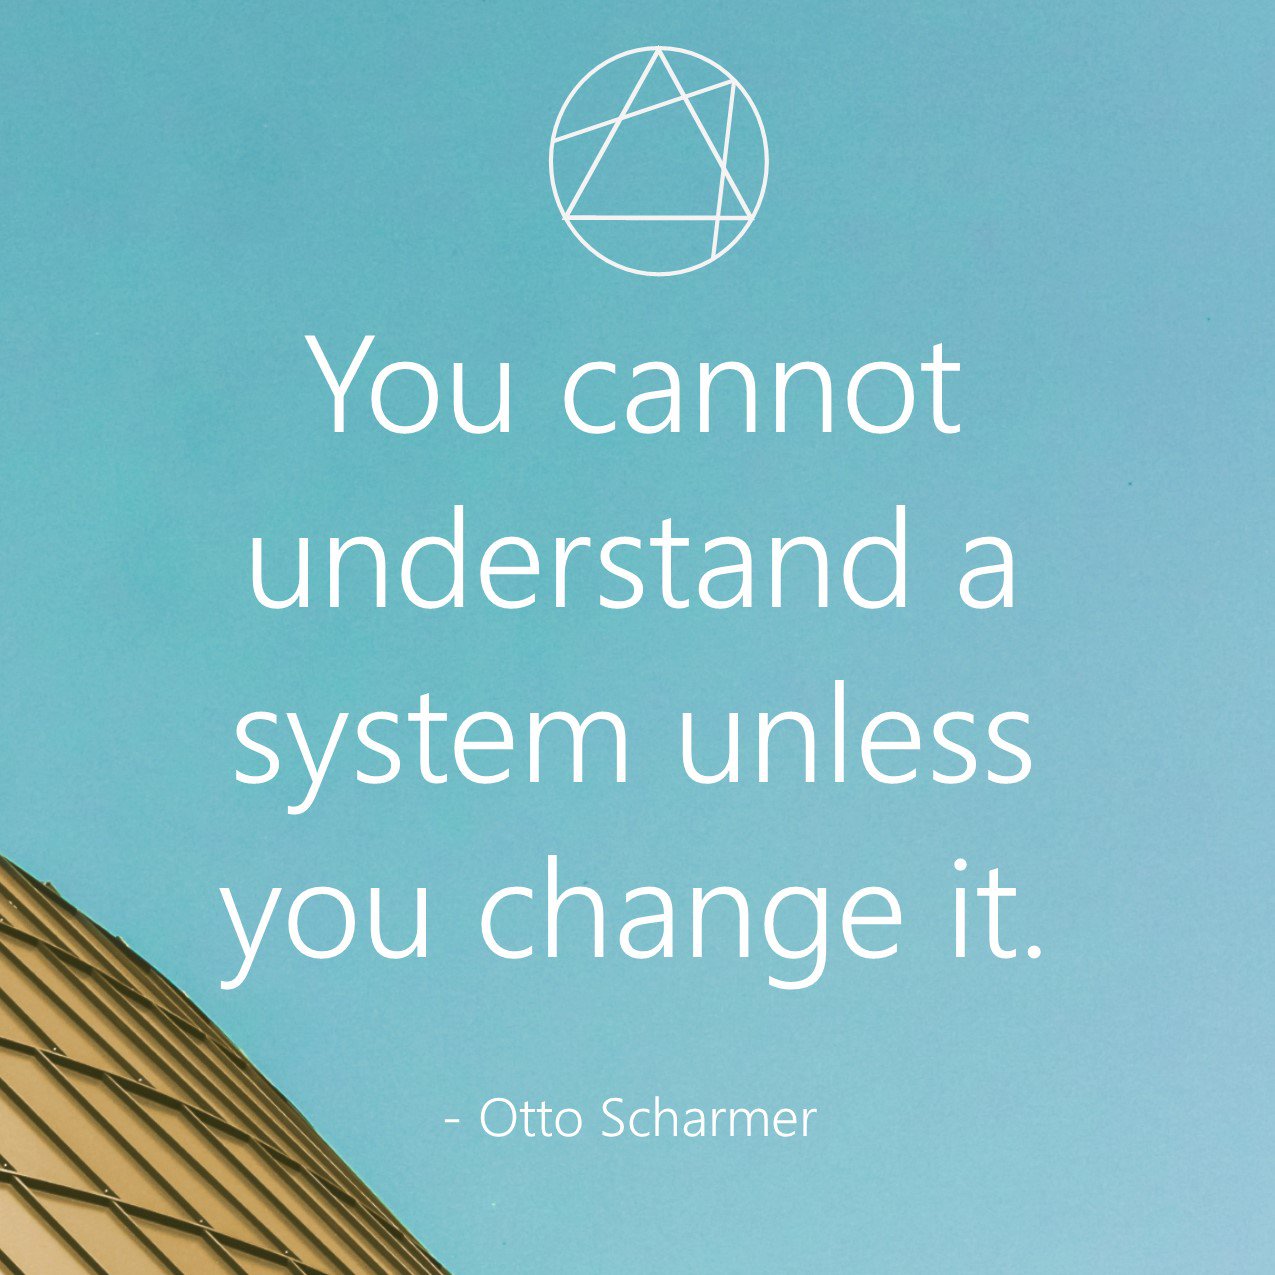 You cannot understand a system unless...